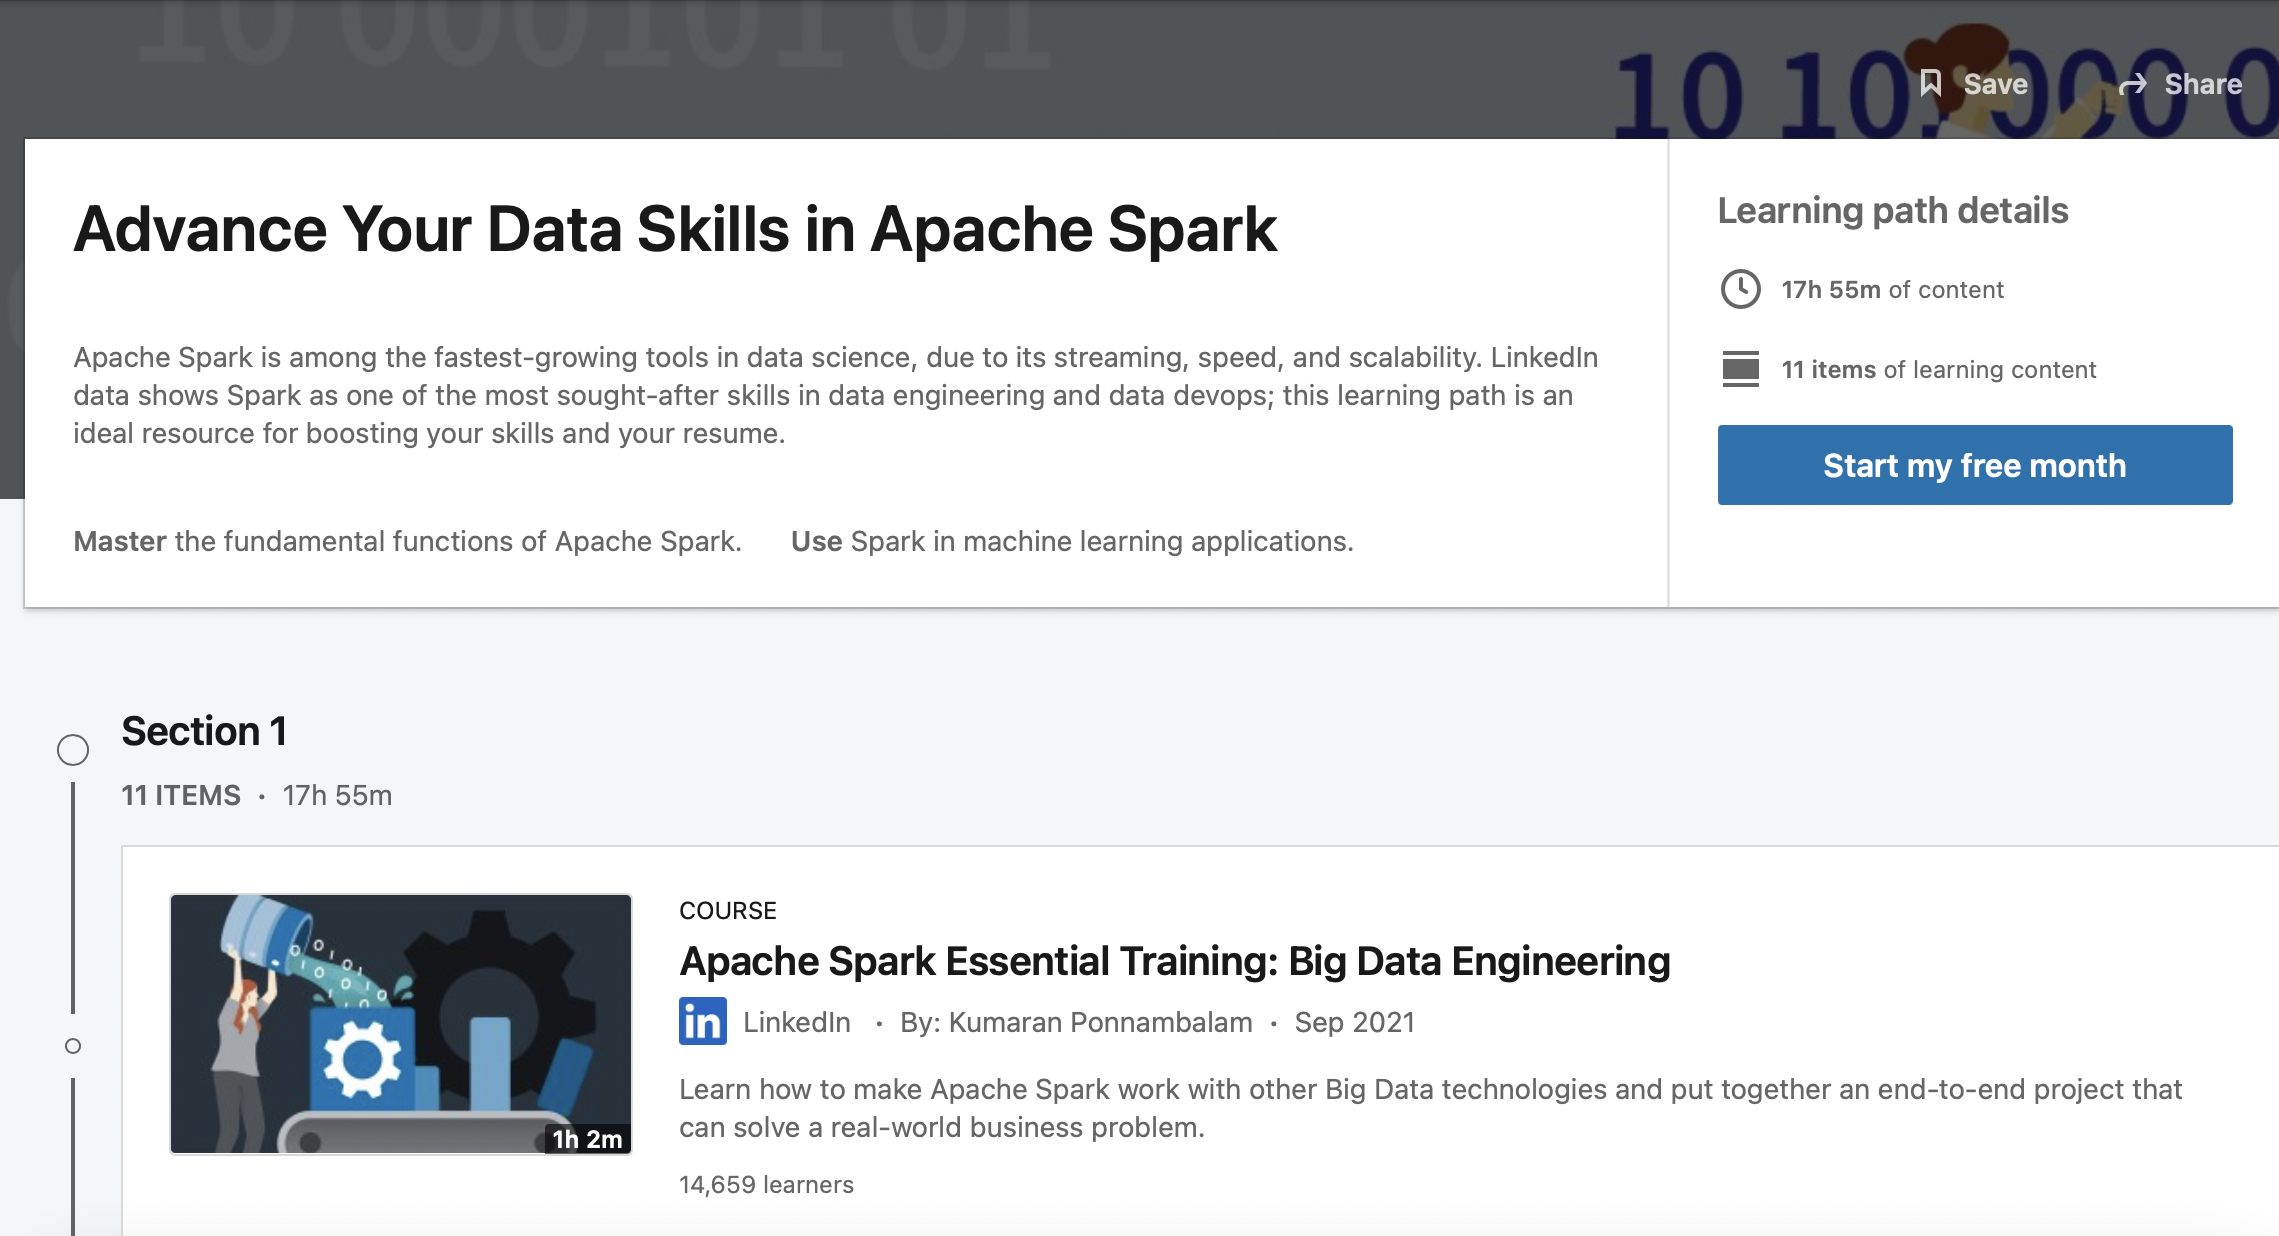 Advance your Data Skills in Apache Spark